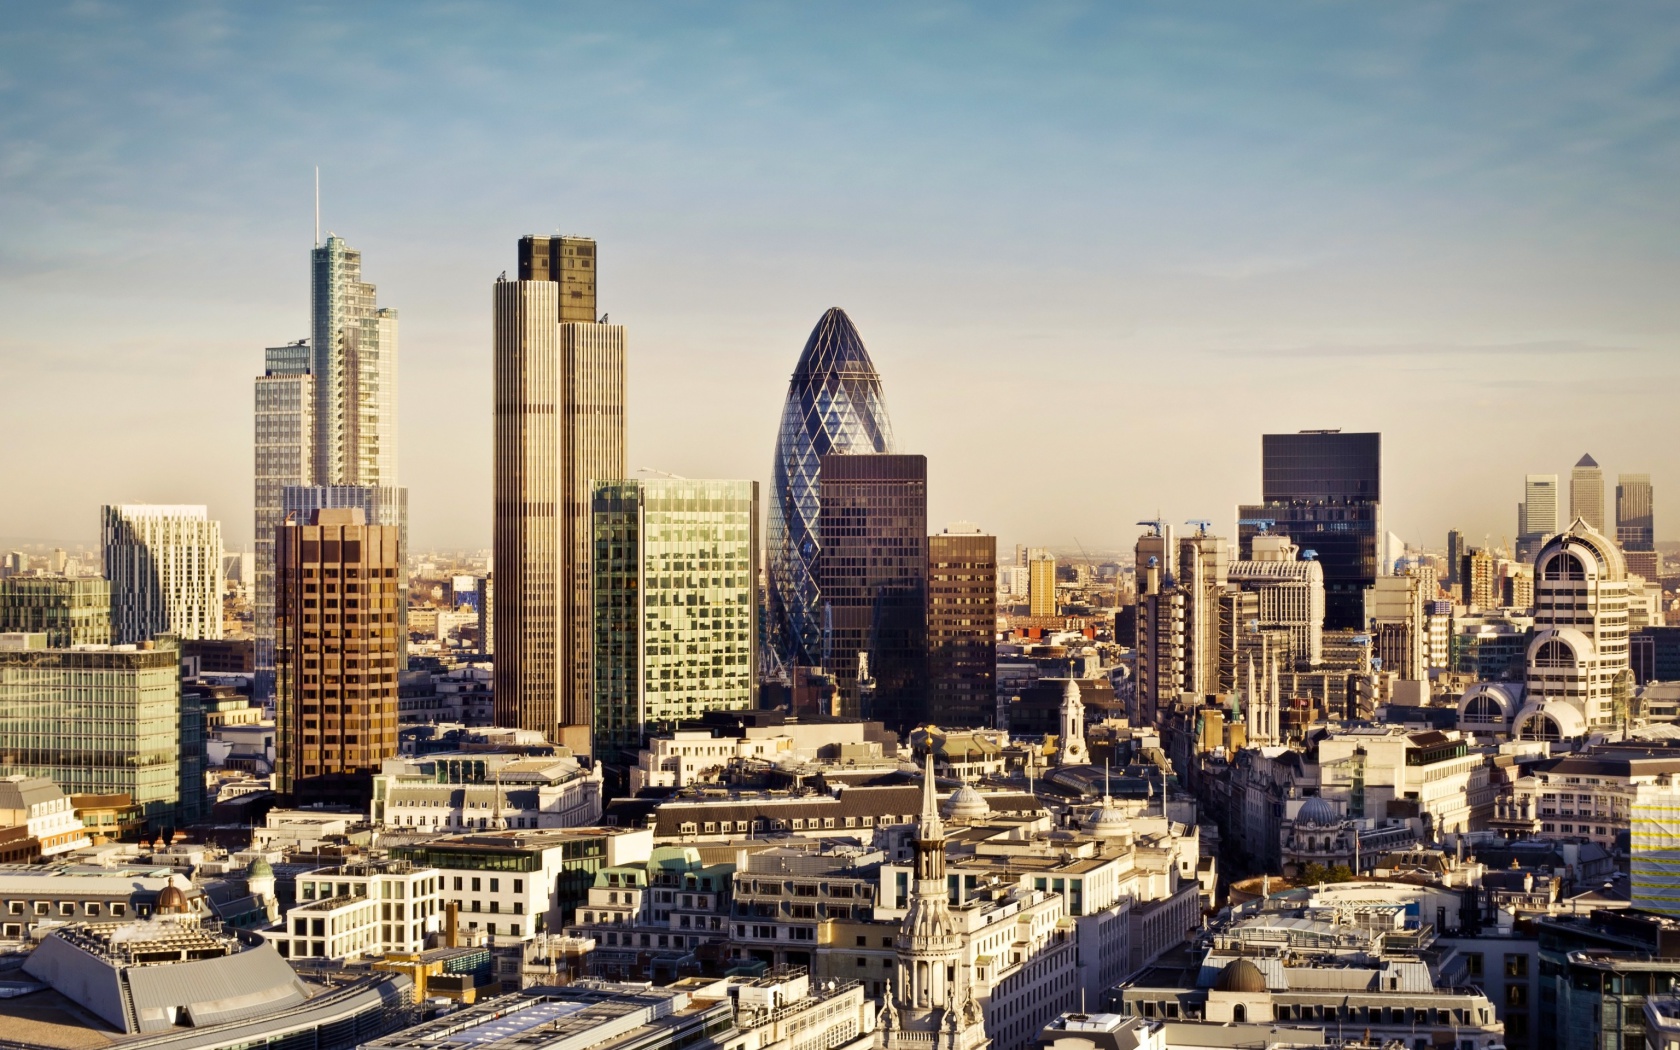 Das London Skyscraper District with 30 St Mary Axe Wallpaper 1680x1050